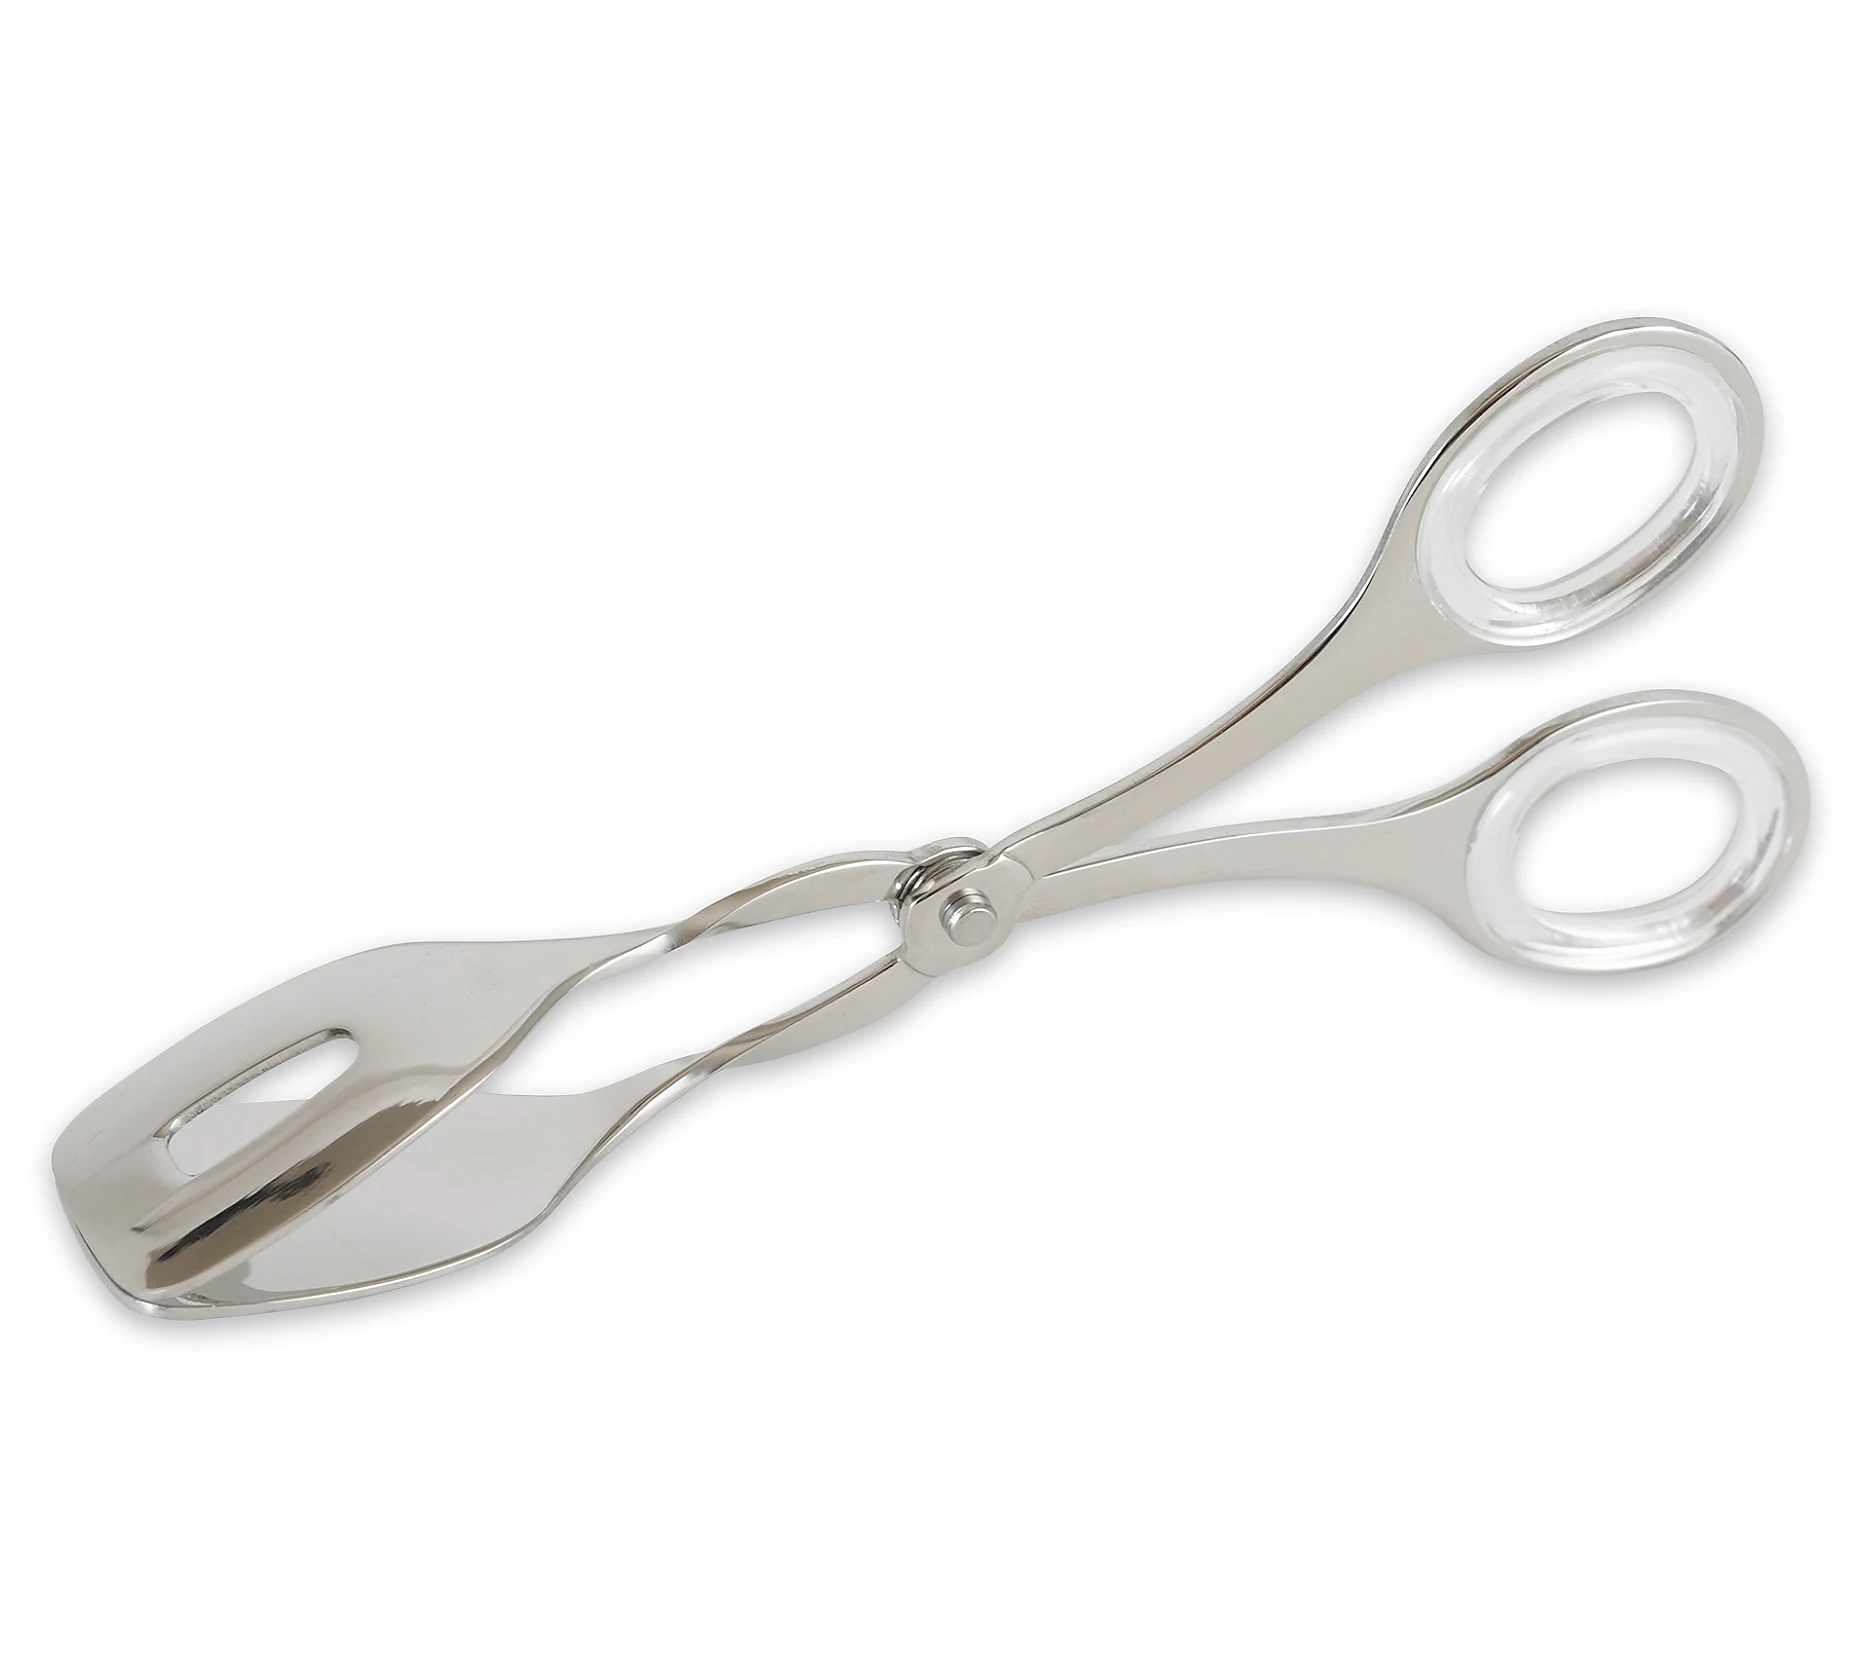 RSVP Large Stainless Steel Serving Tongs with Acrylic Handles